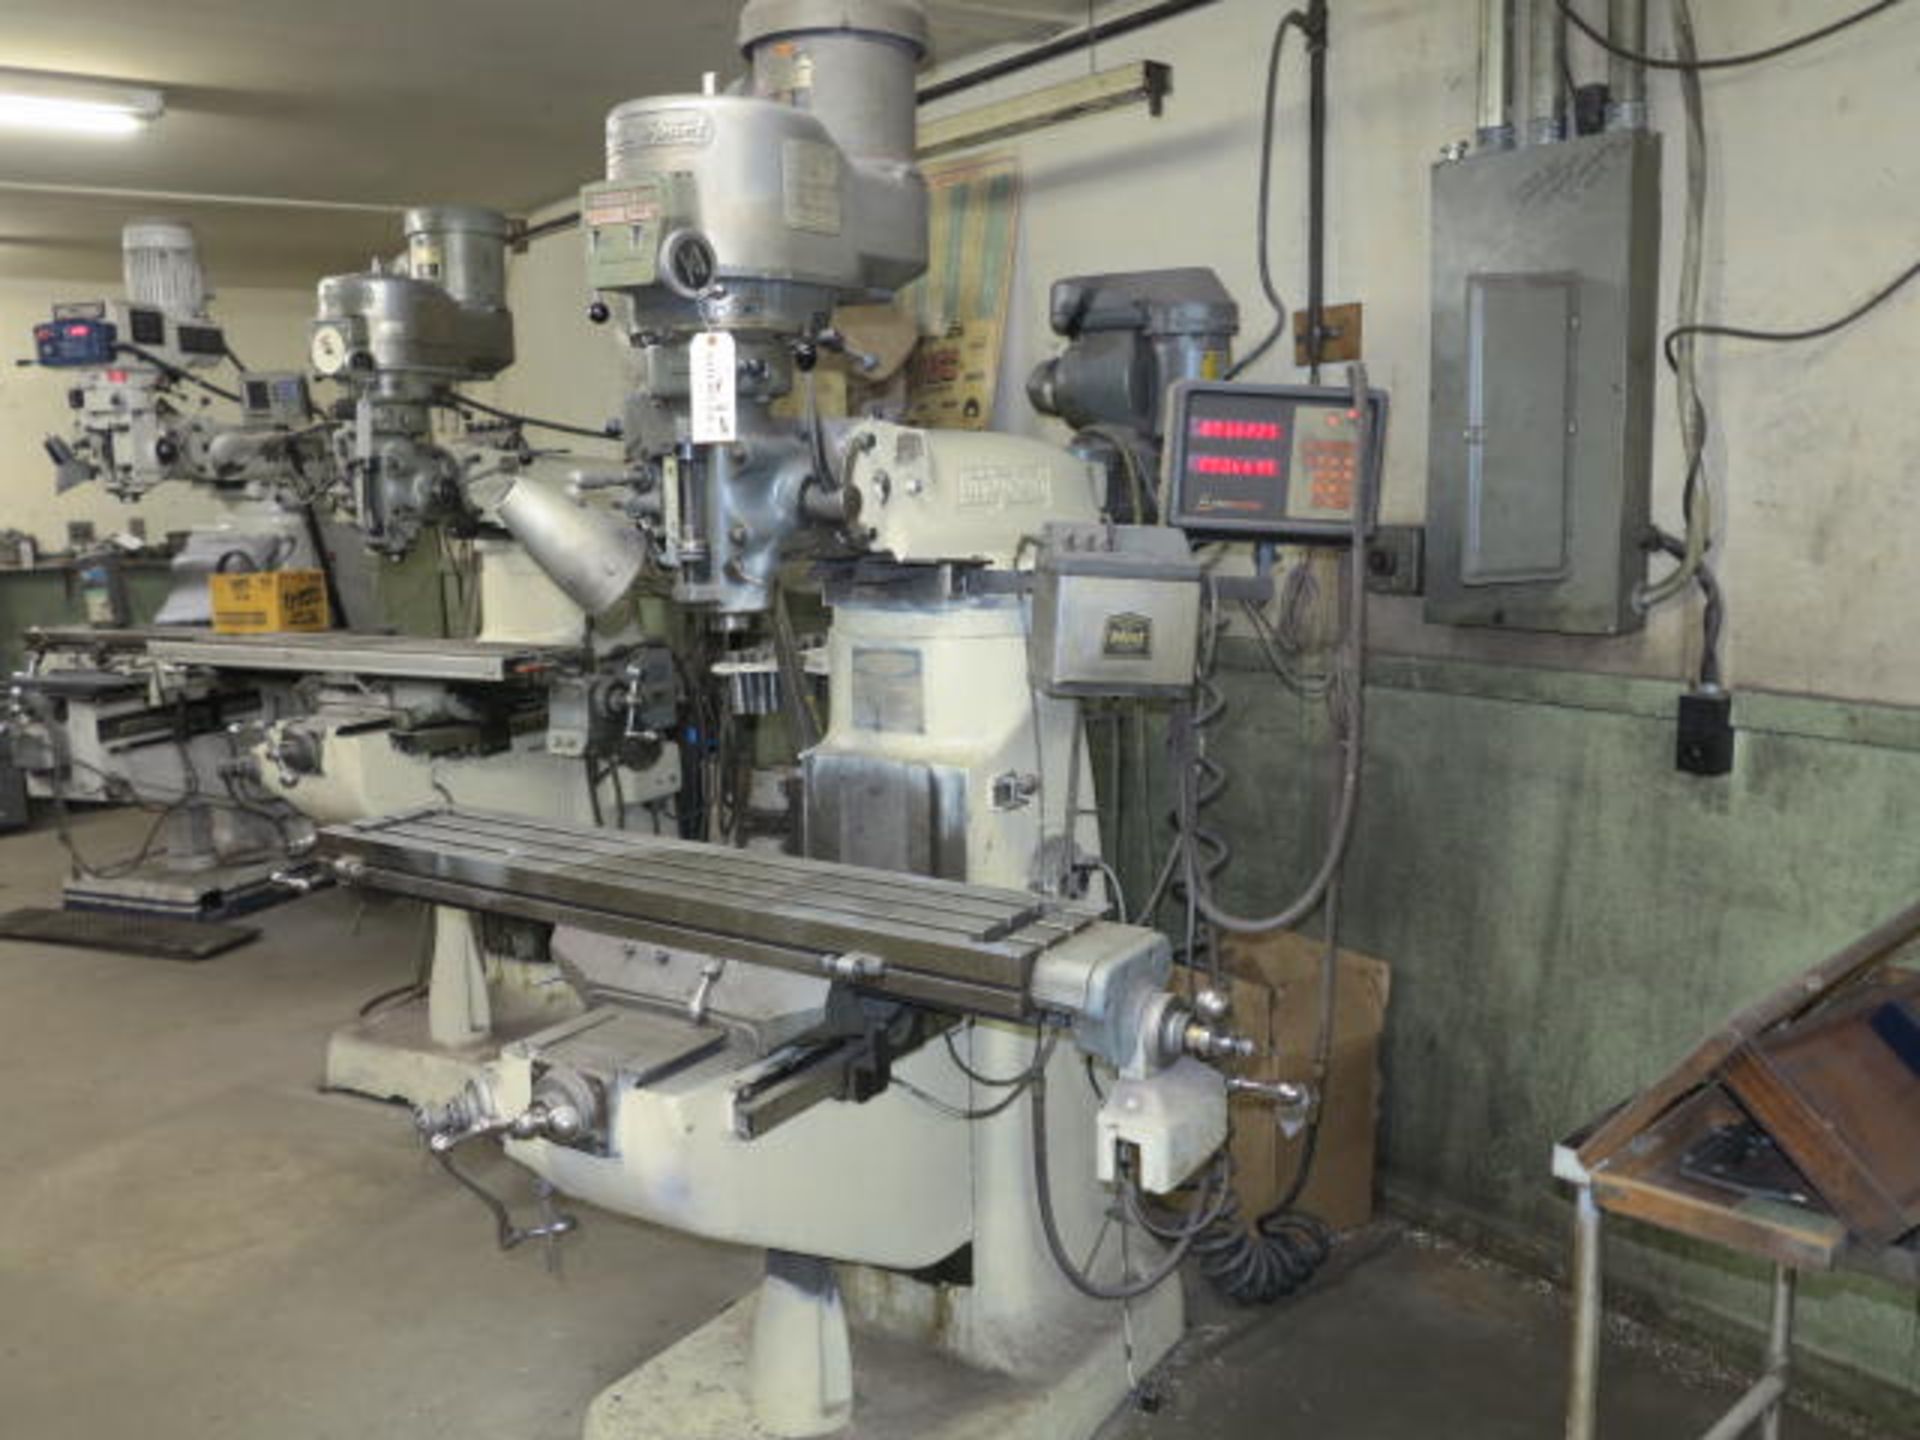 Bridgeport Series I 2hp Vertical Mill s/n 12/BR 230325 2 HP Drive, 36'' Table, Power Feed, Anilam